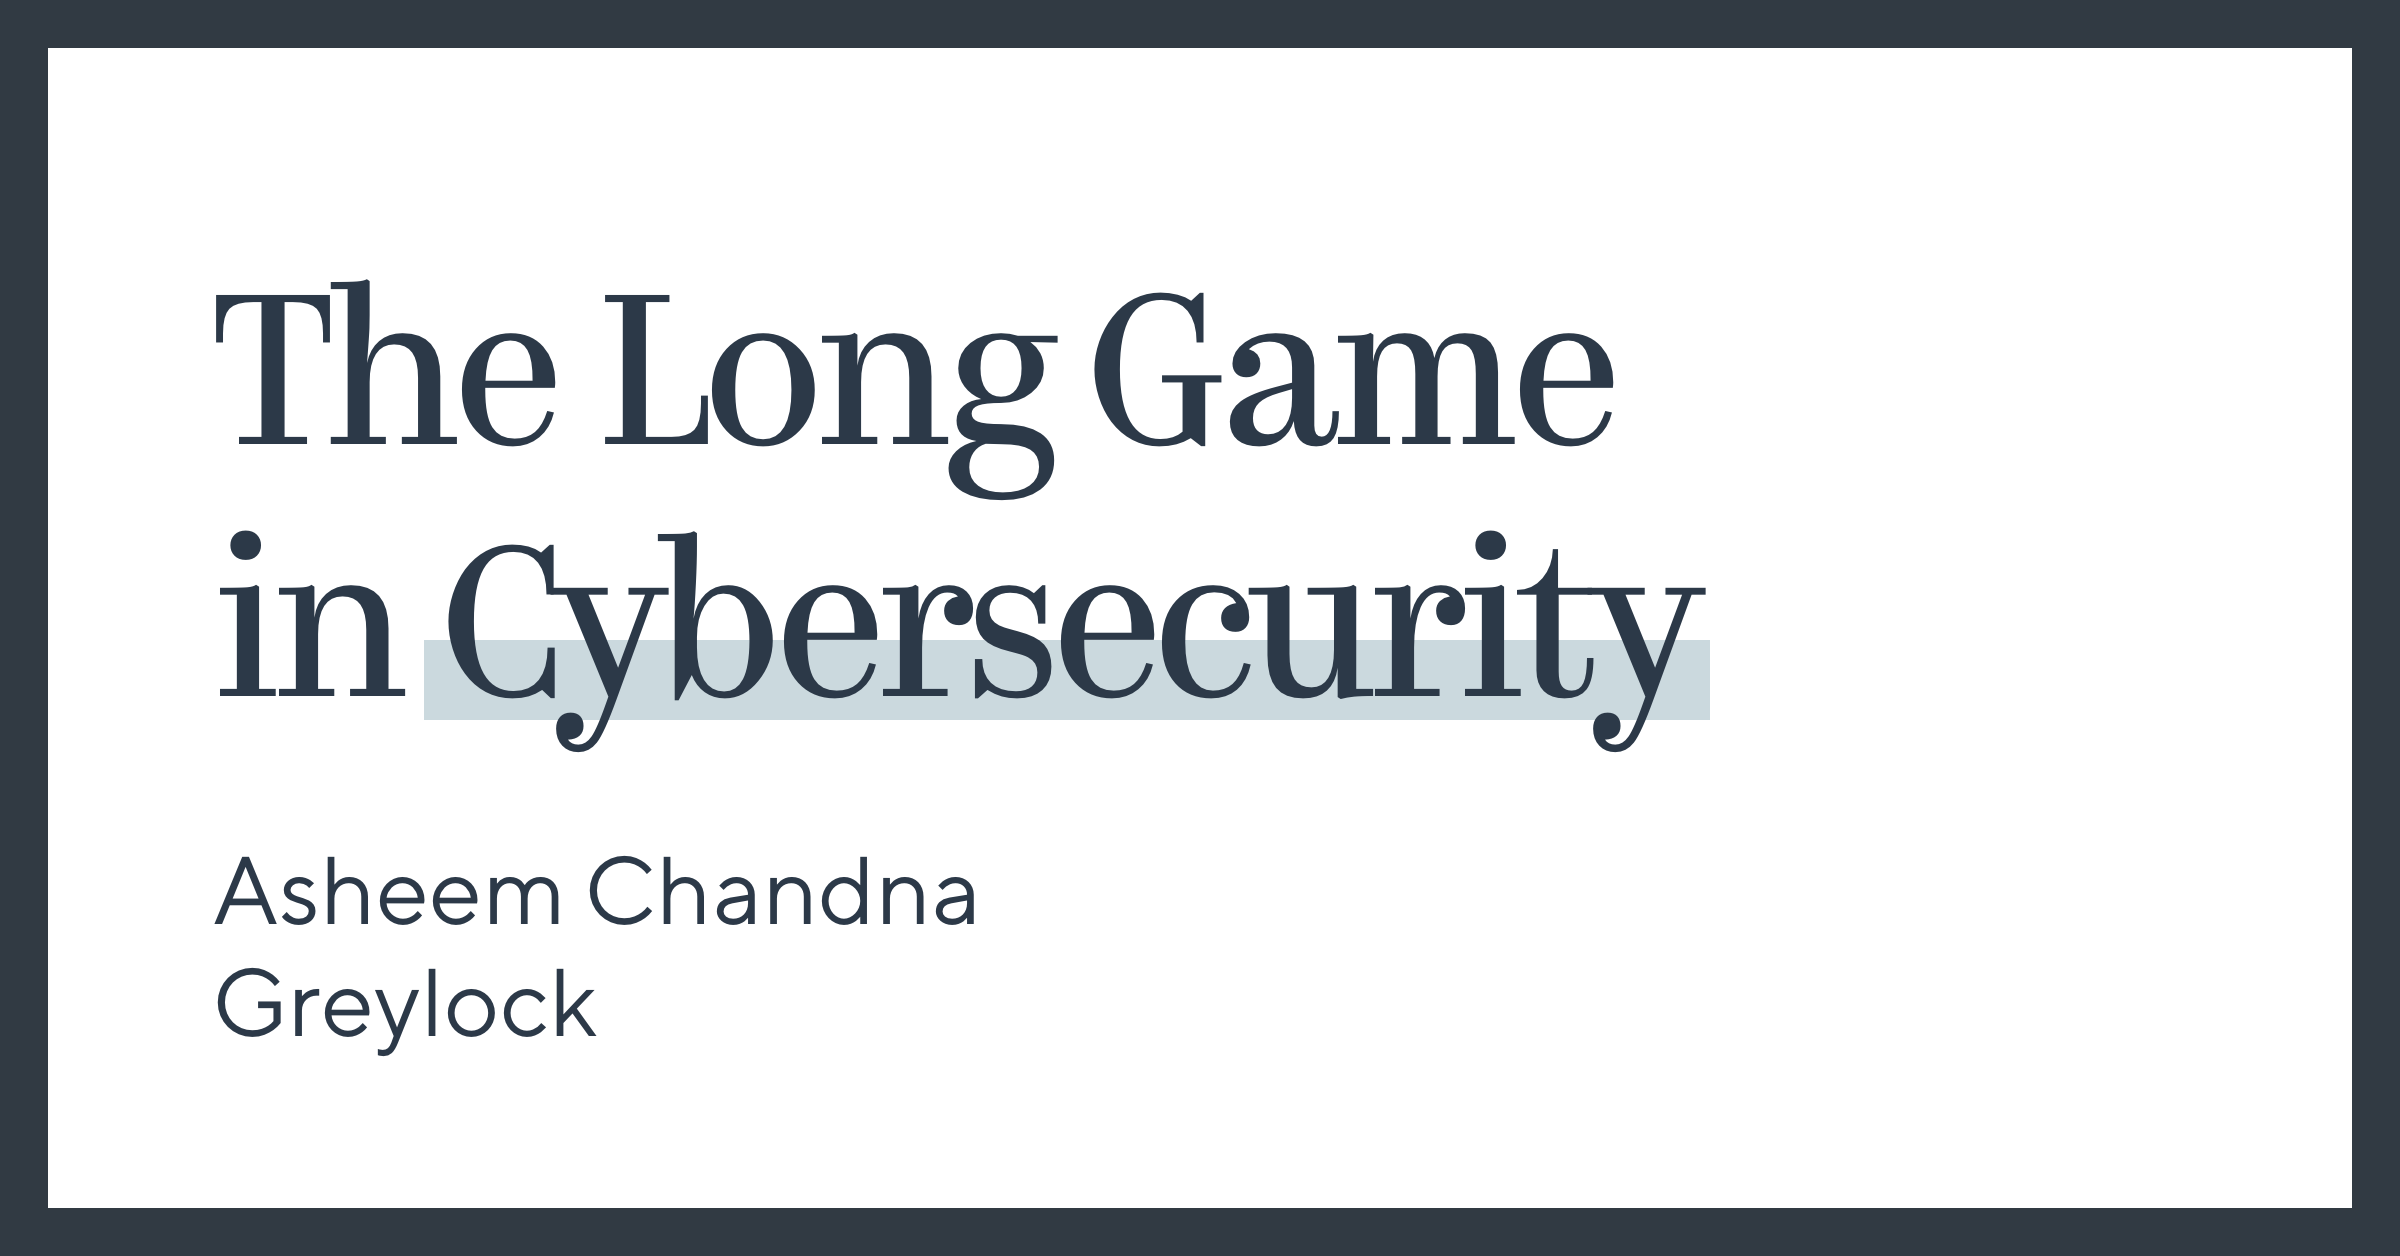 The Long Game in Cybersecurity